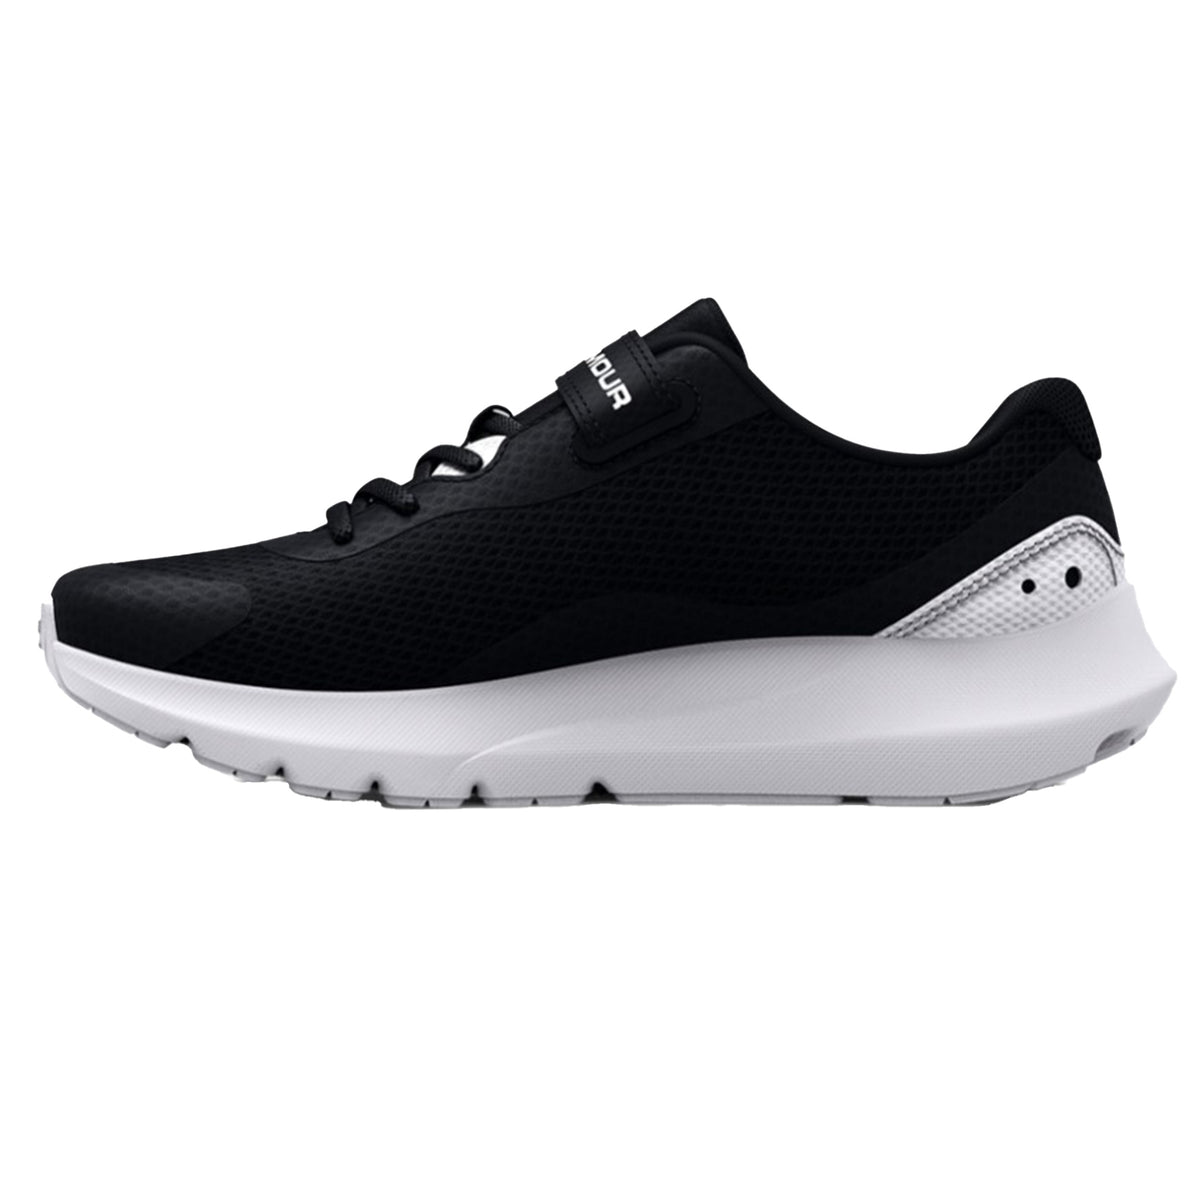 Under Armour Surge 3 Kids Running Shoes: Black/White